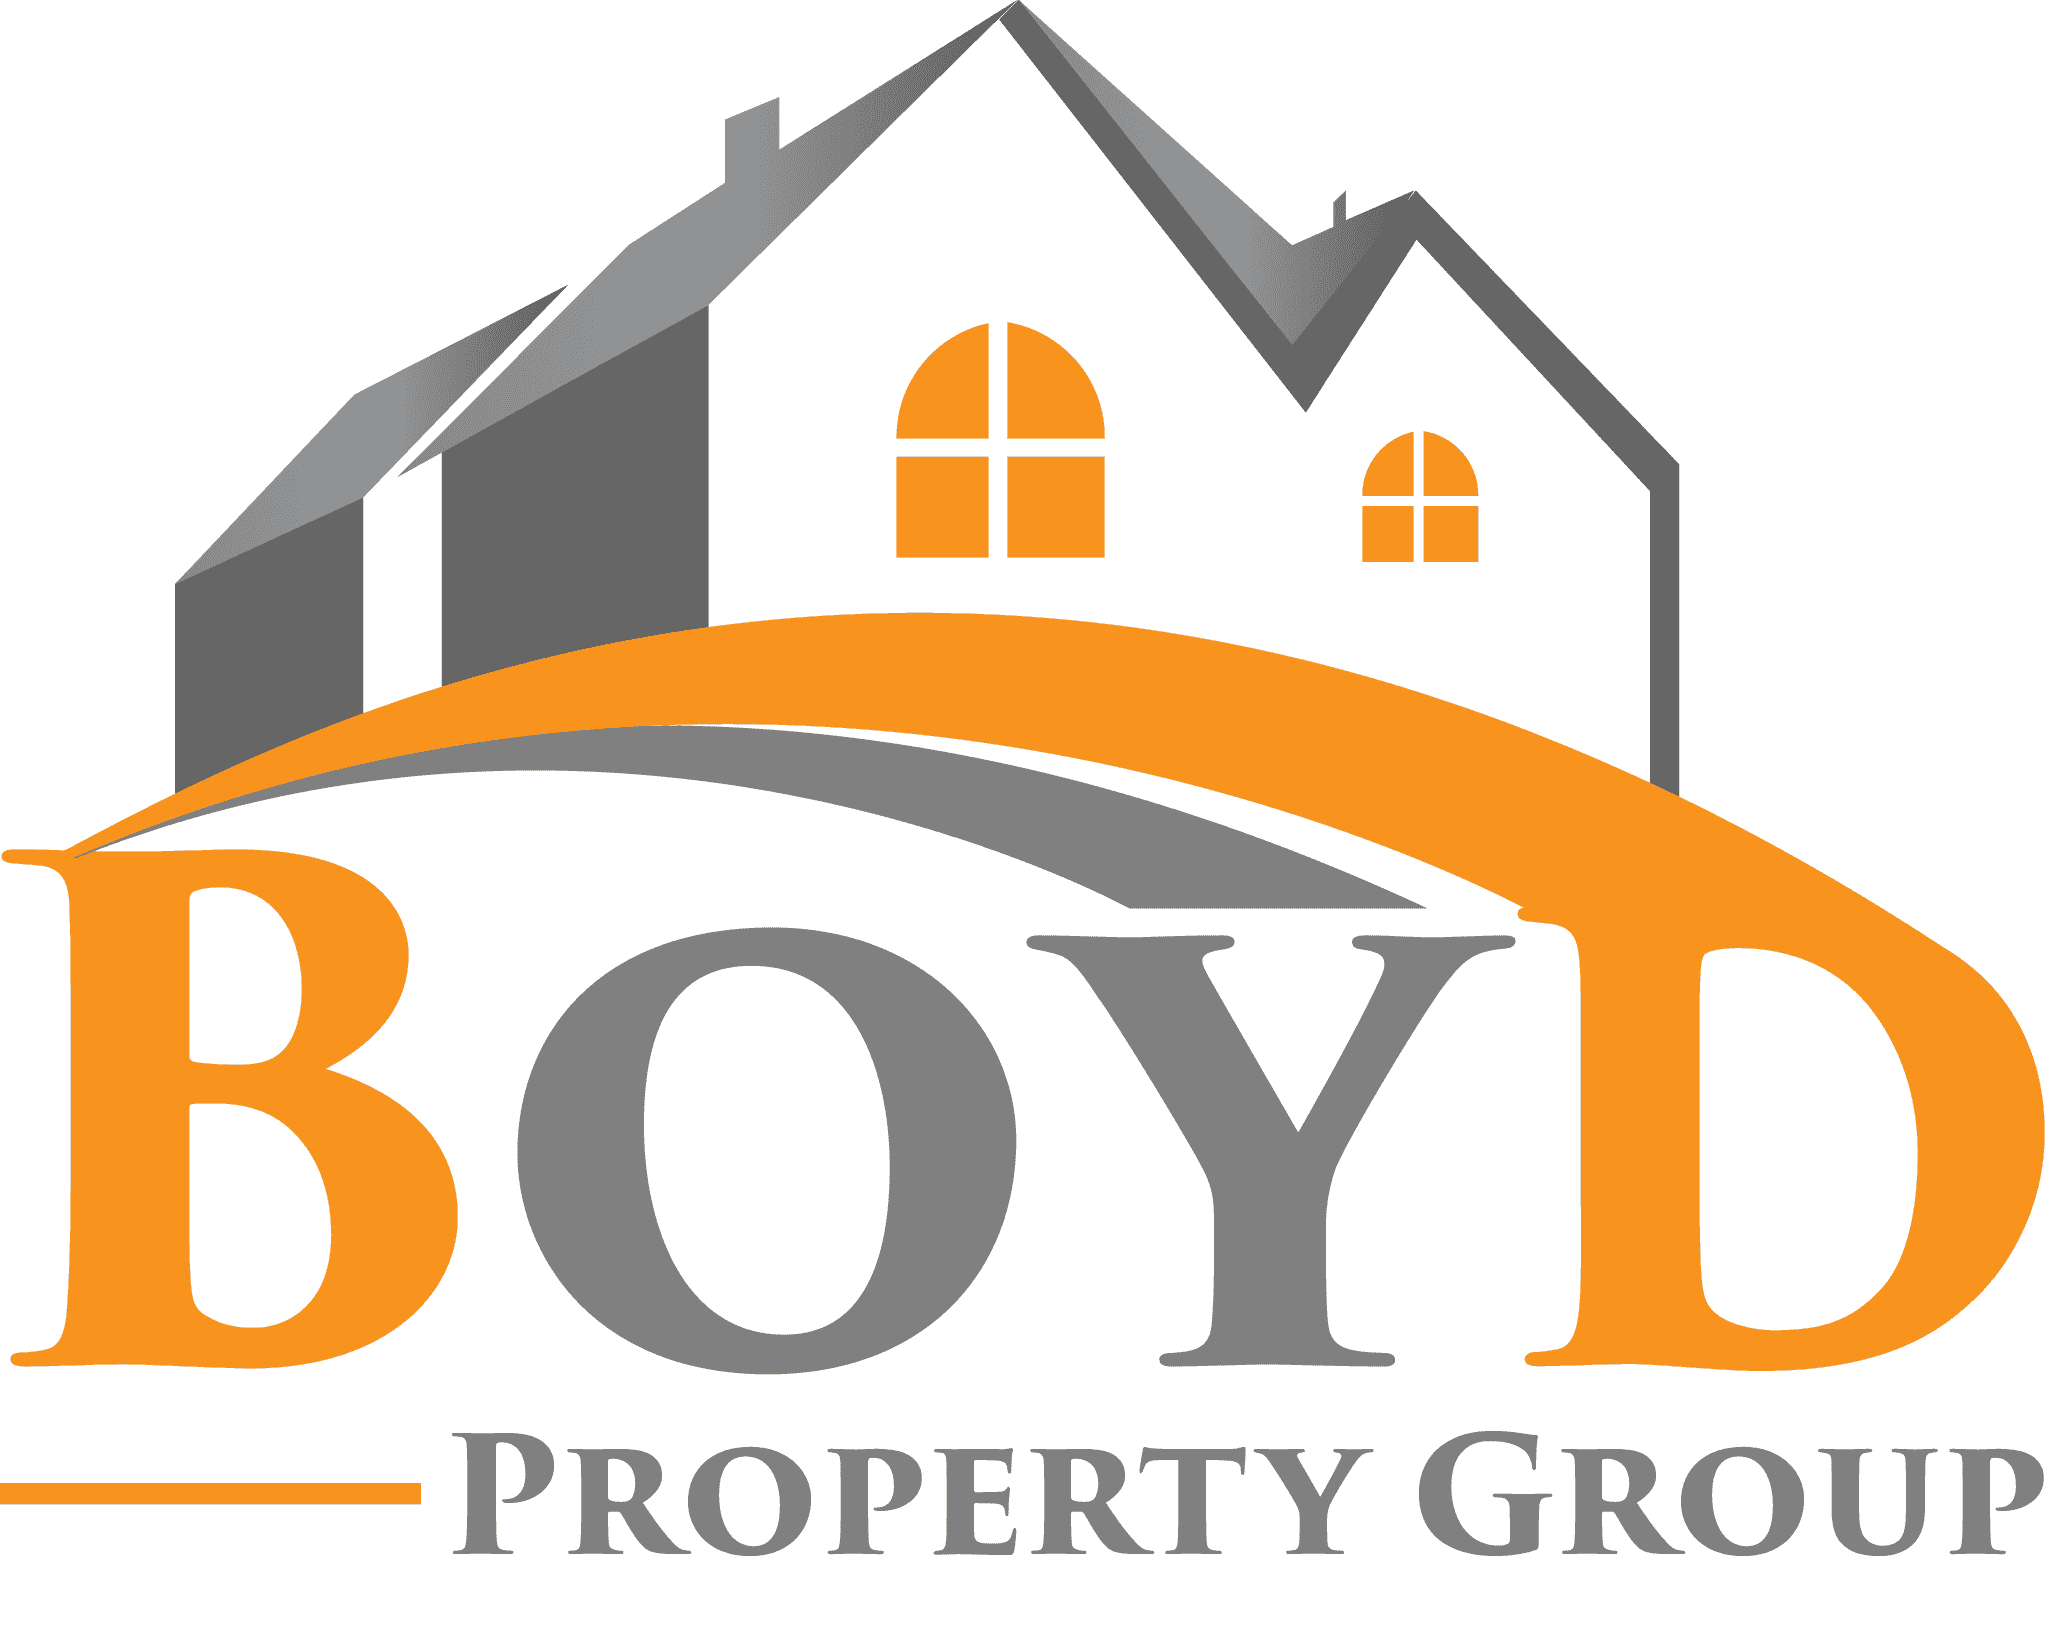 Farmville Roofing Services | Boyd Property Group